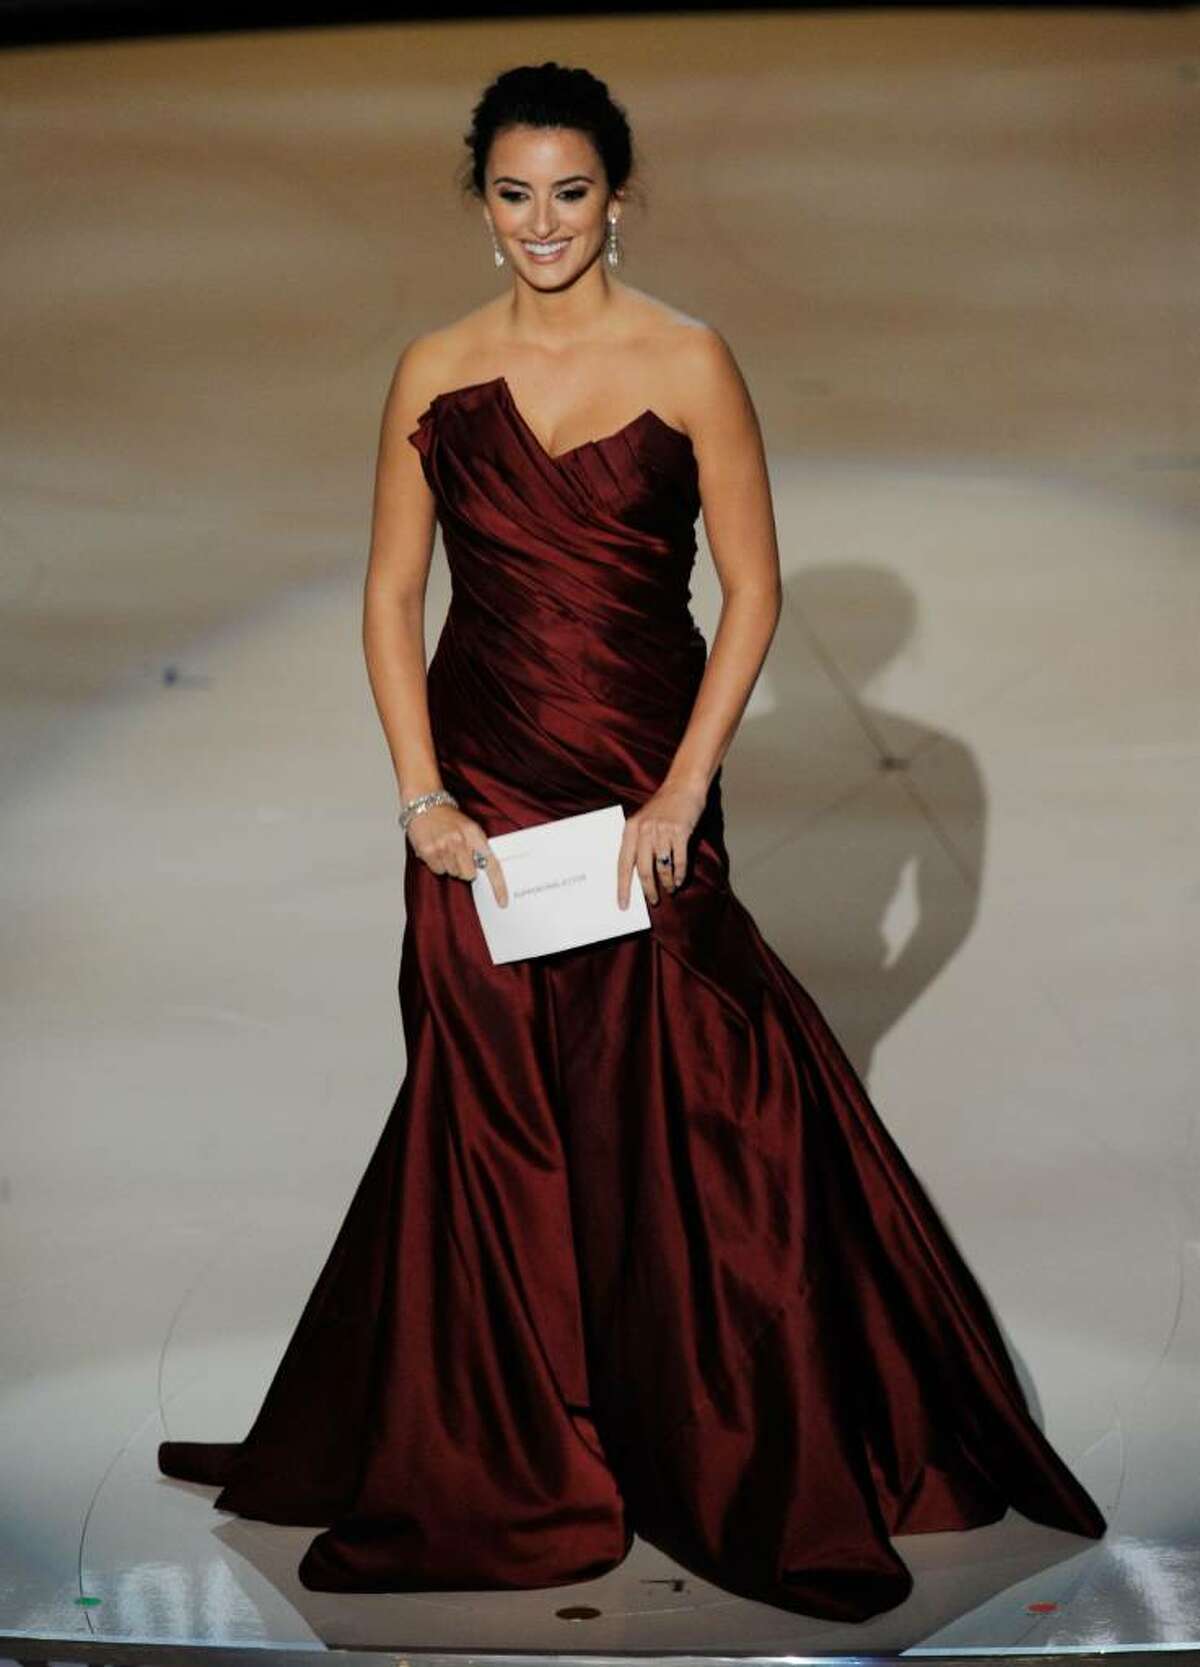 HOLLYWOOD - MARCH 07: Actress Penelope Cruz onstage during the 82nd Annual Academy Awards held at Kodak Theatre on March 7, 2010 in Hollywood, California. (Photo by Kevin Winter/Getty Images) *** Local Caption *** Penelope Cruz